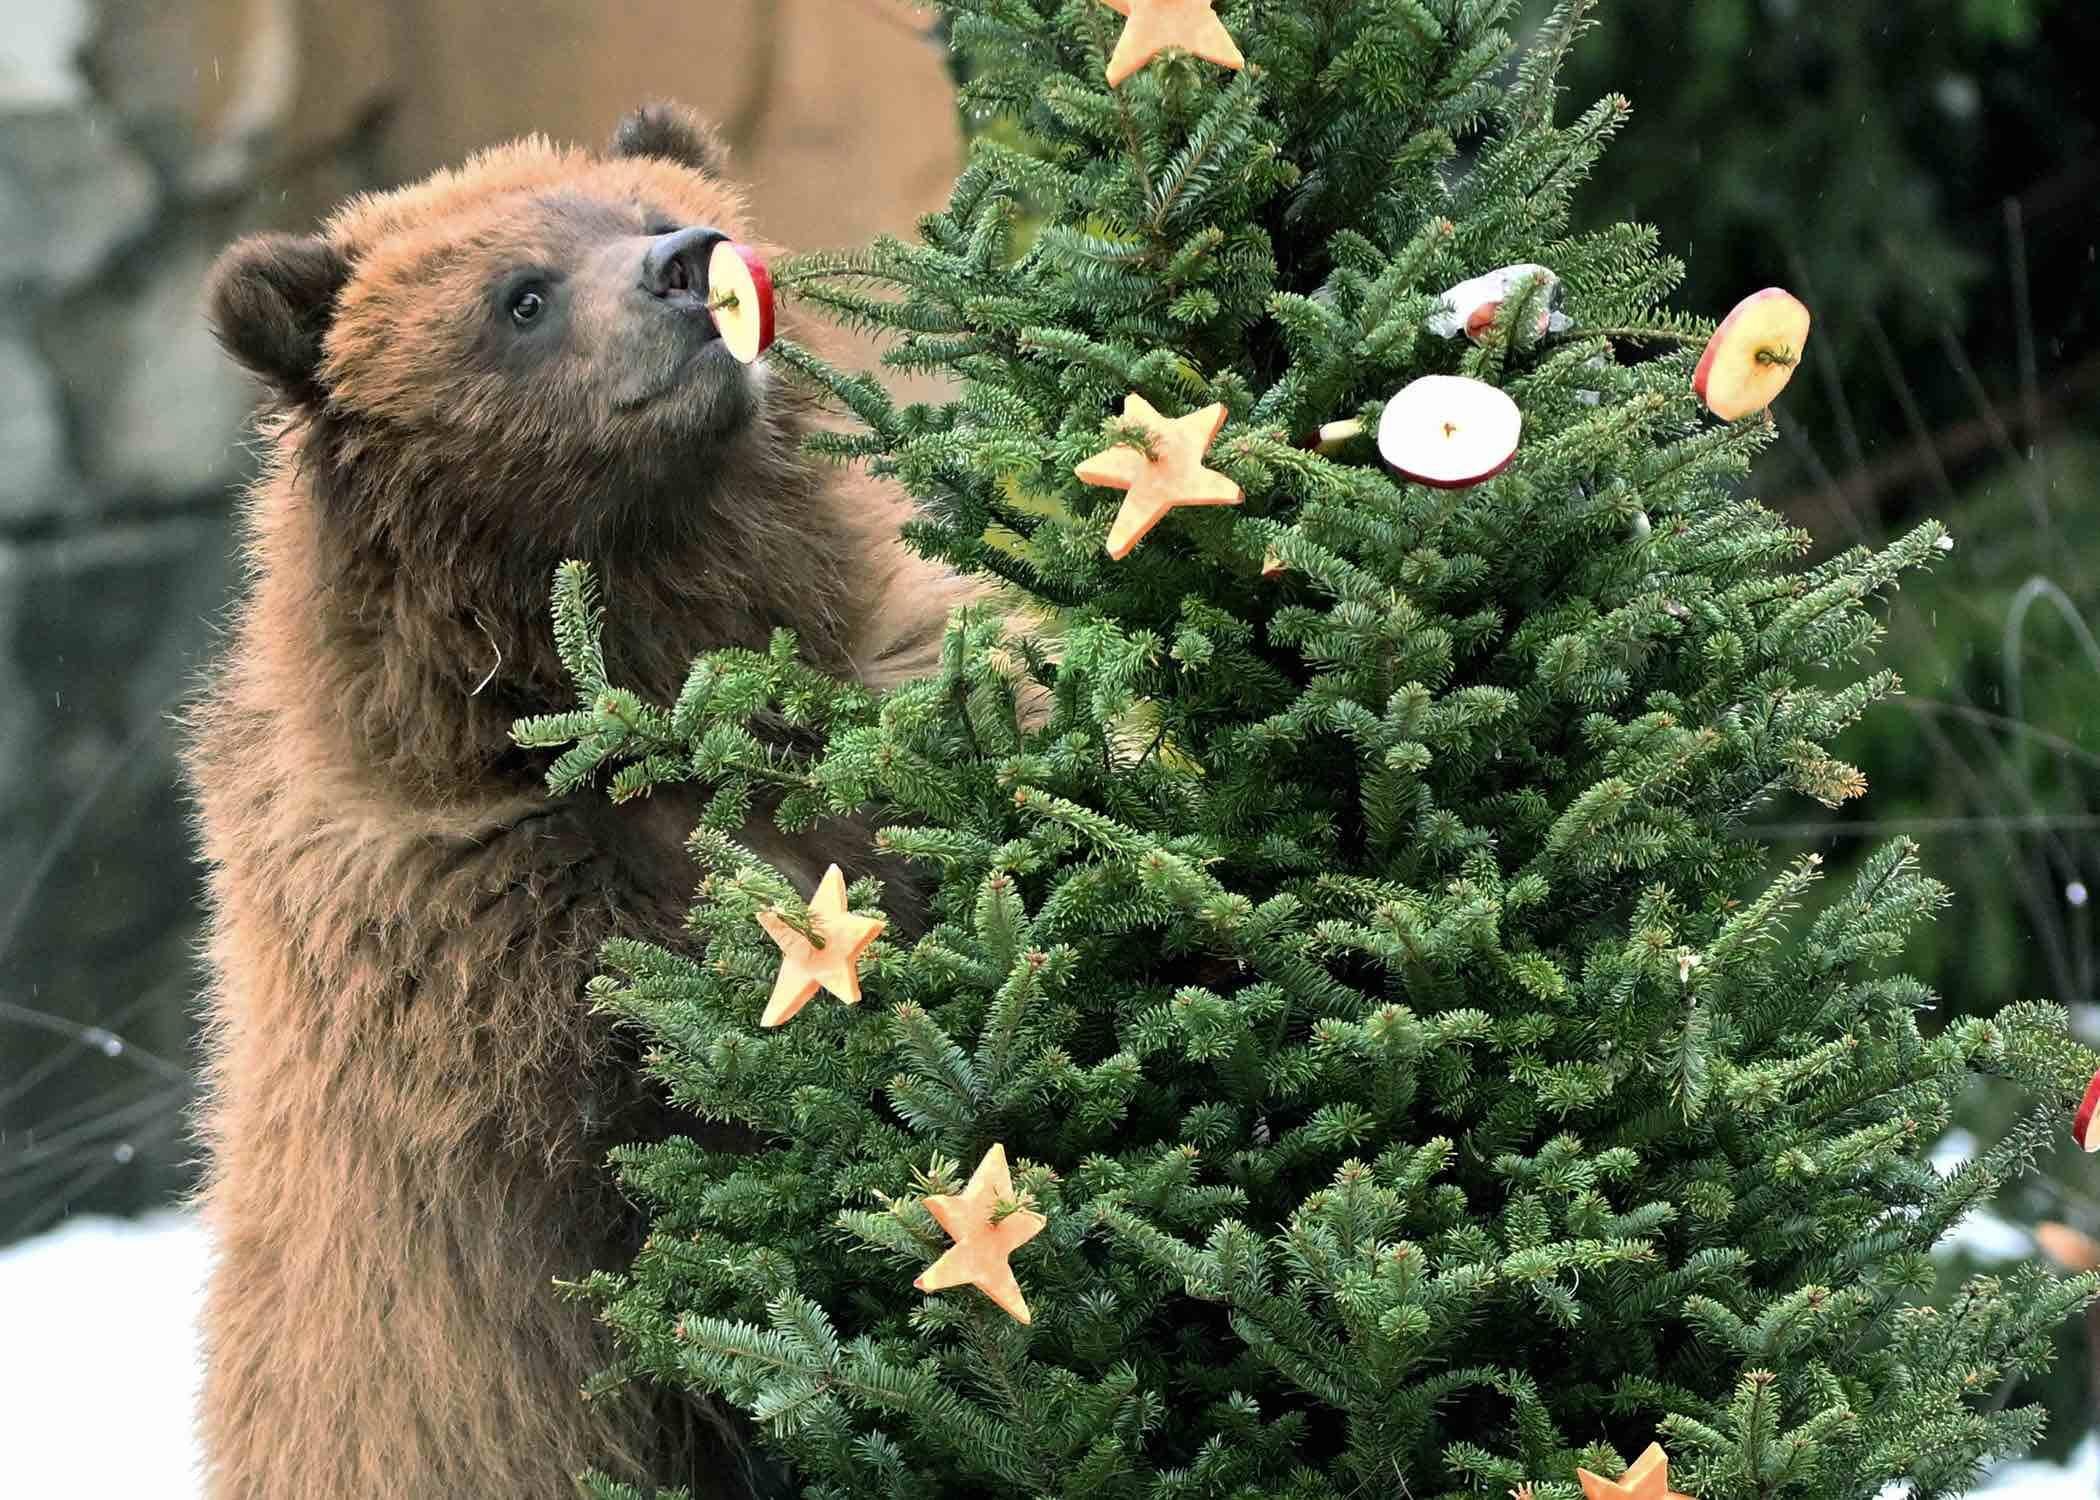 Tim, a 1-year-old brown bear at Brookfield Zoo, eyes some treats placed on a Christmas tree for enrichment. (Jim Schulz / CZS-Brookfield Zoo)